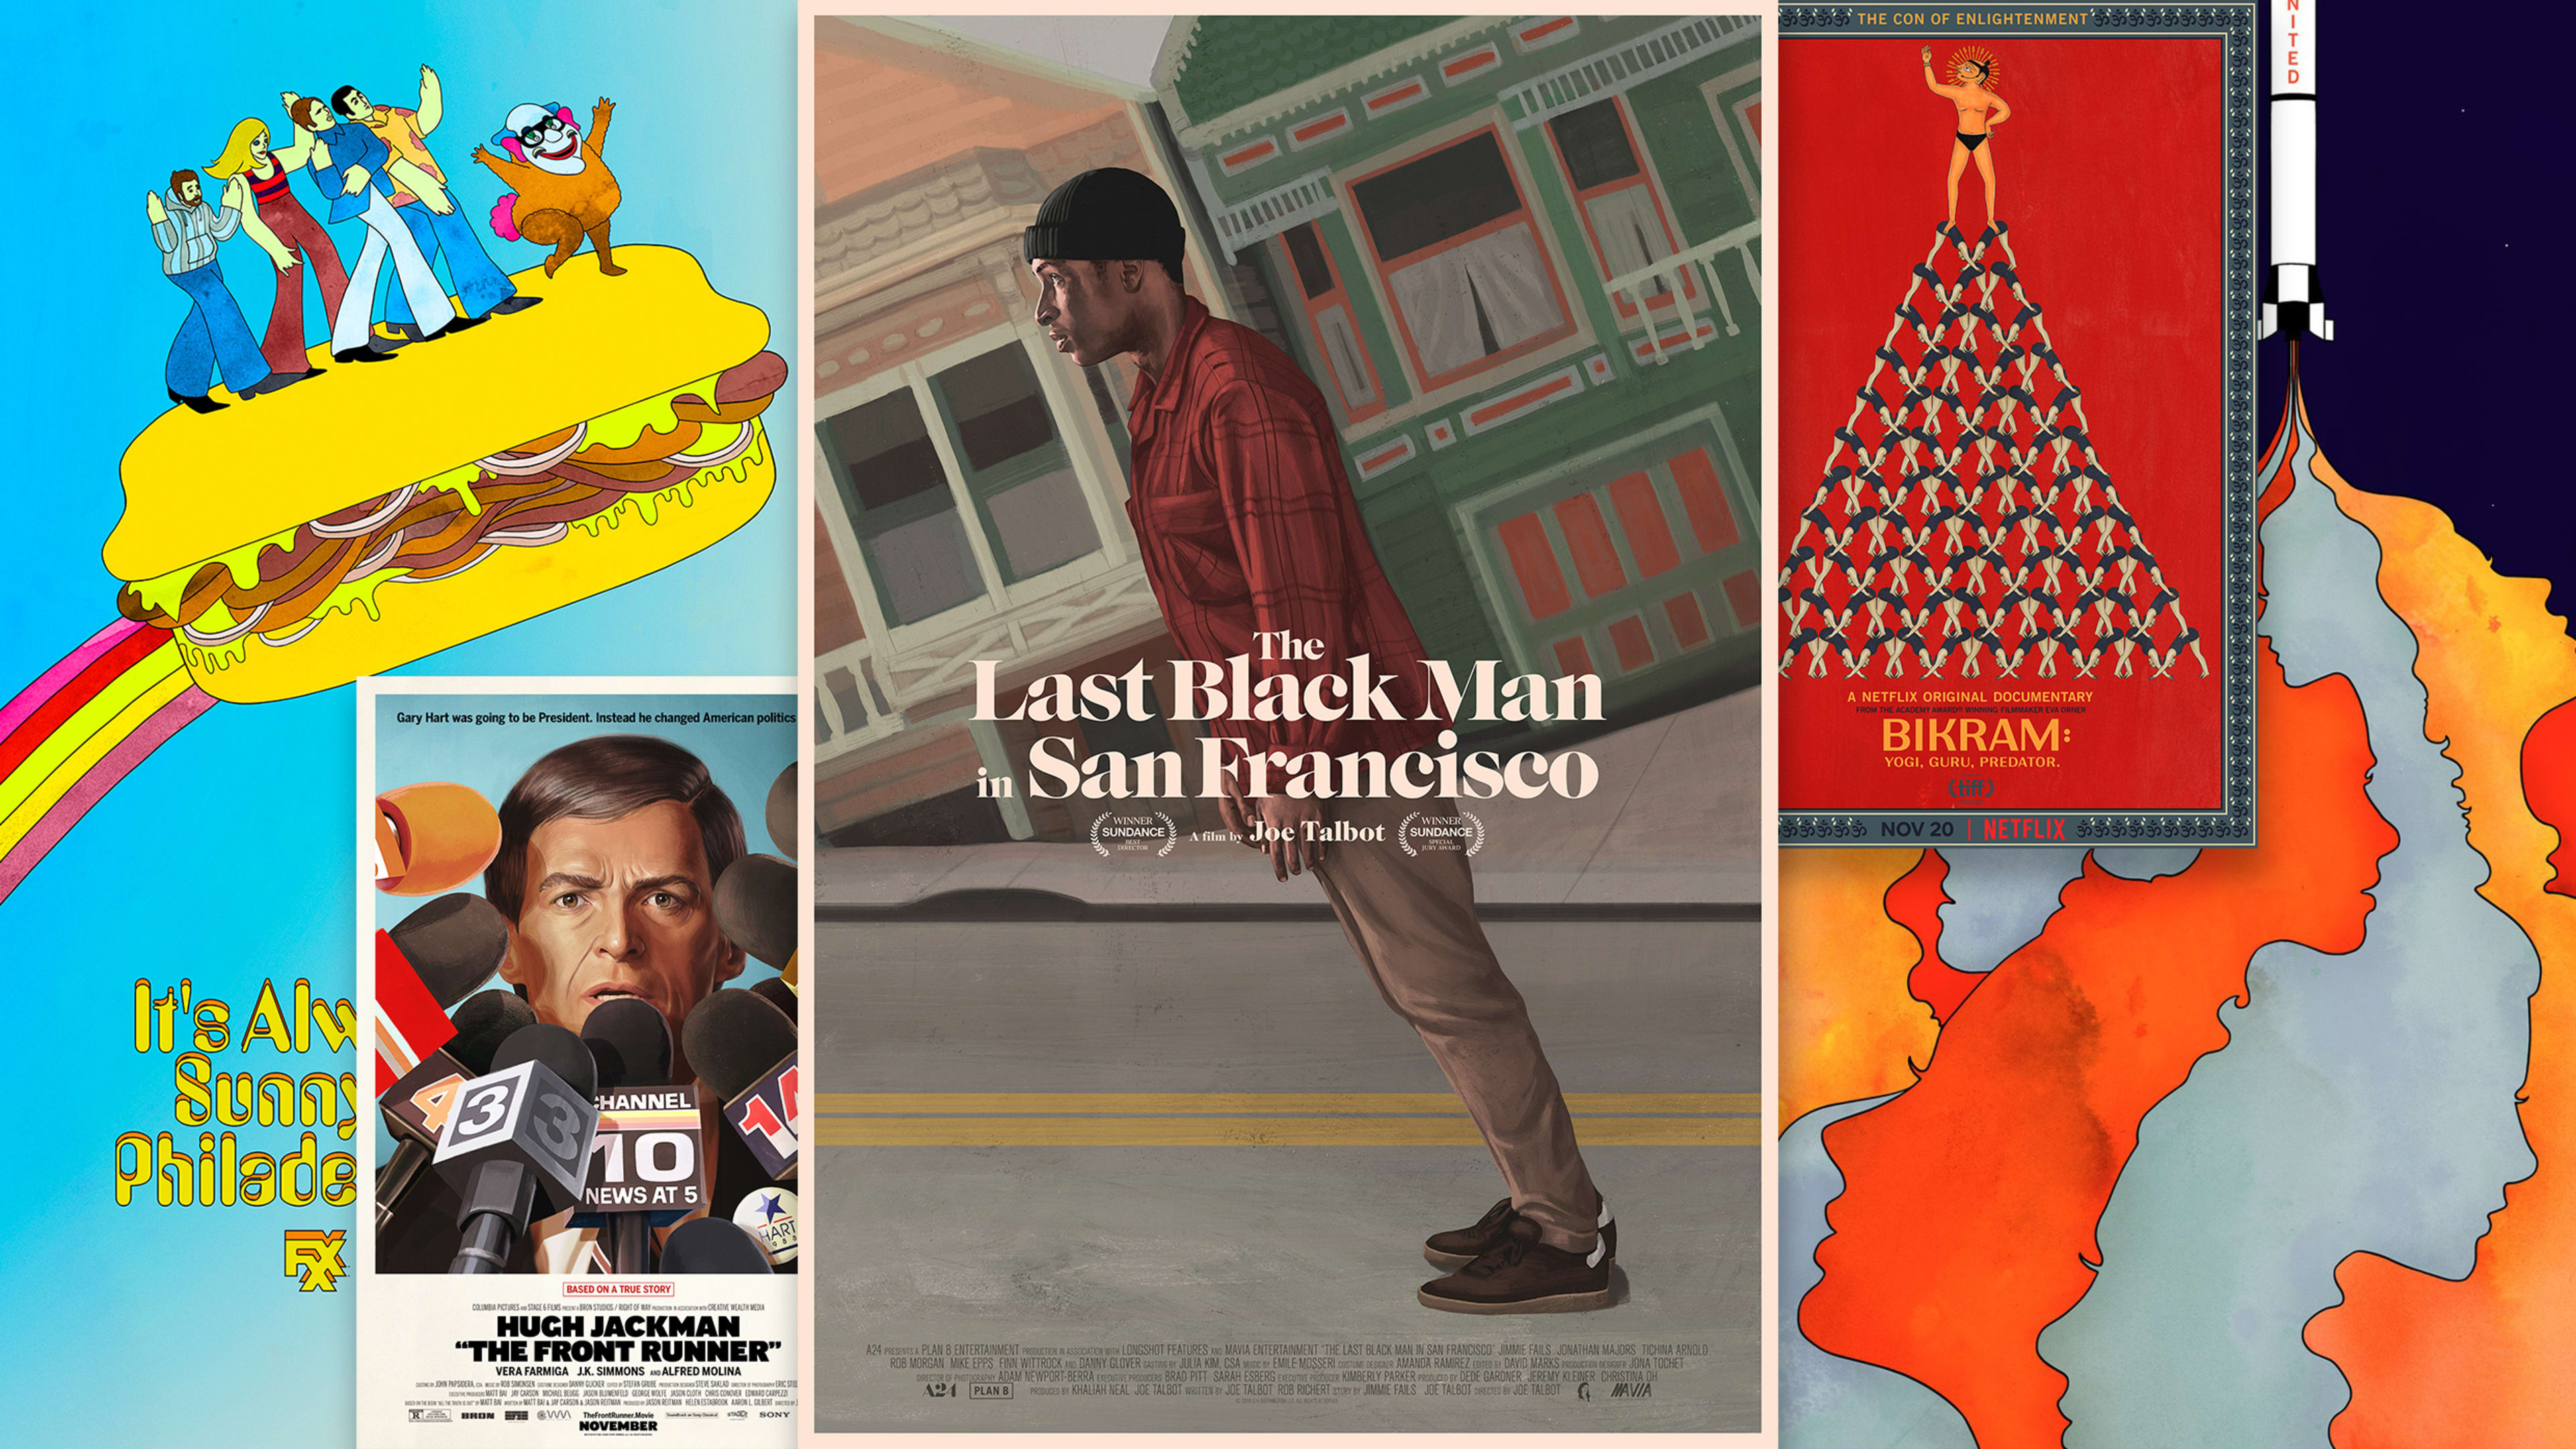 Are we entering a Golden Age of movie poster design?